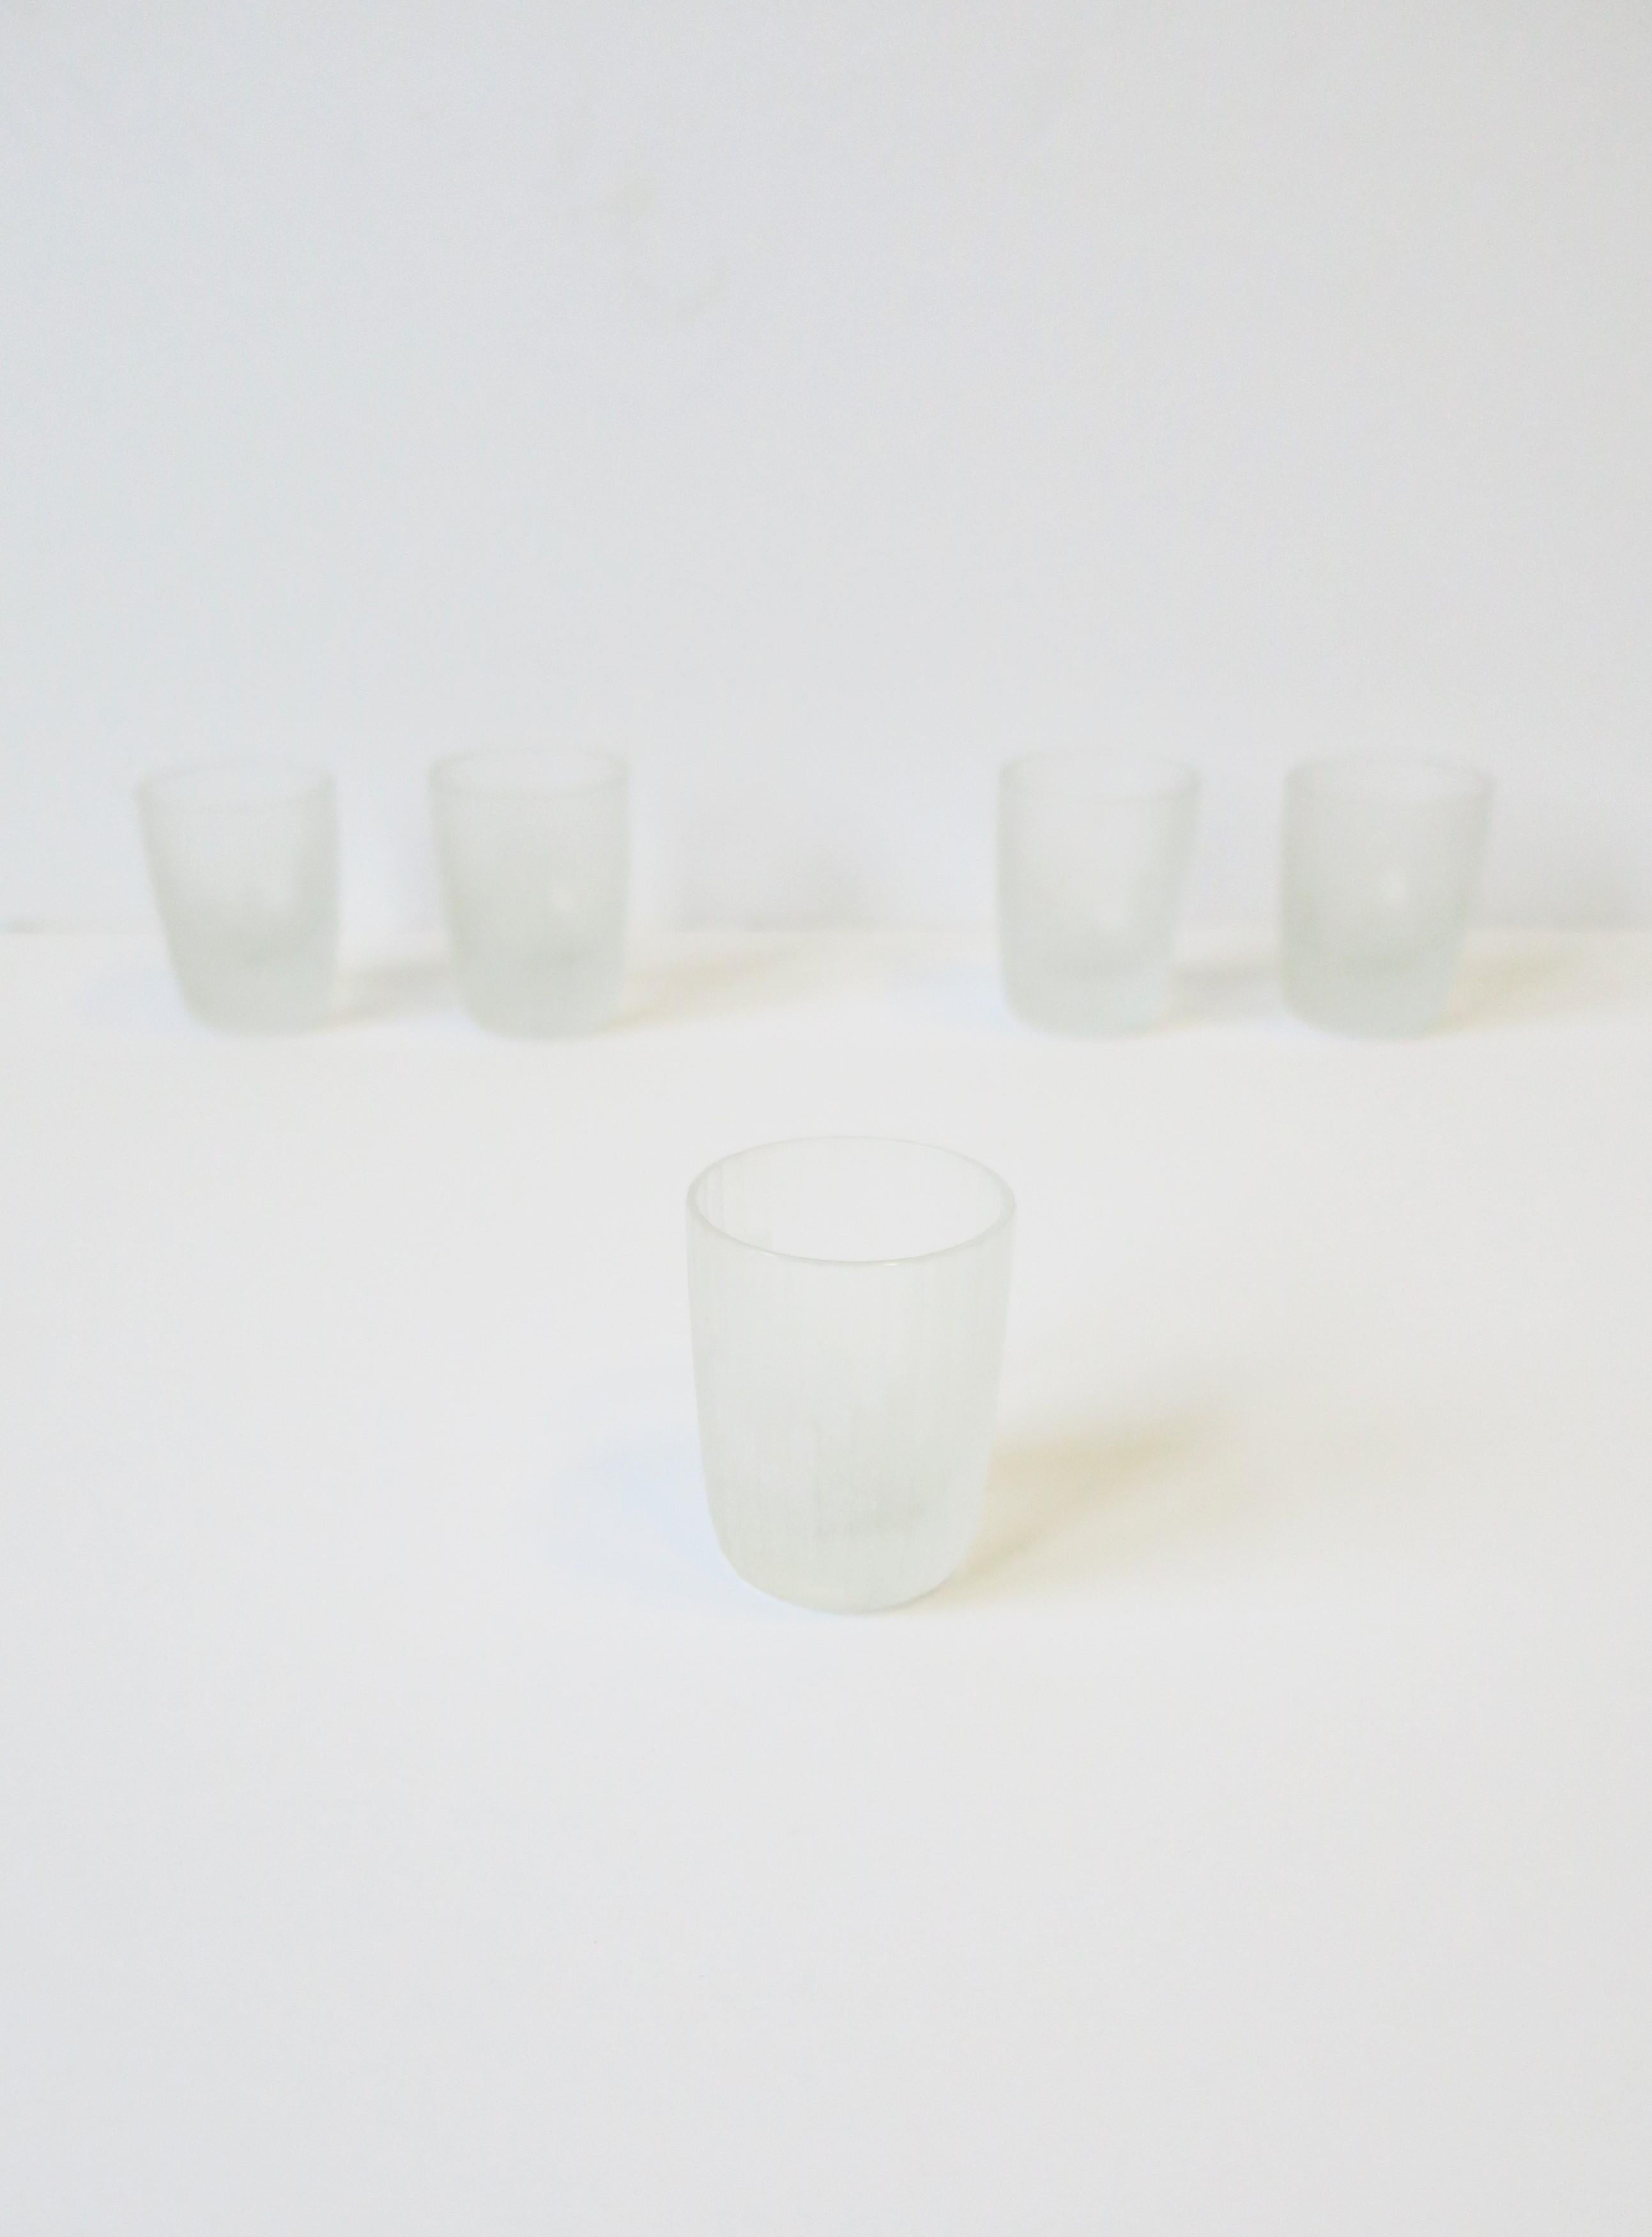 German 70s Modern Carl Rotter Lubeck Shot or Aperitif Glasses, Set of 5 In Good Condition For Sale In New York, NY